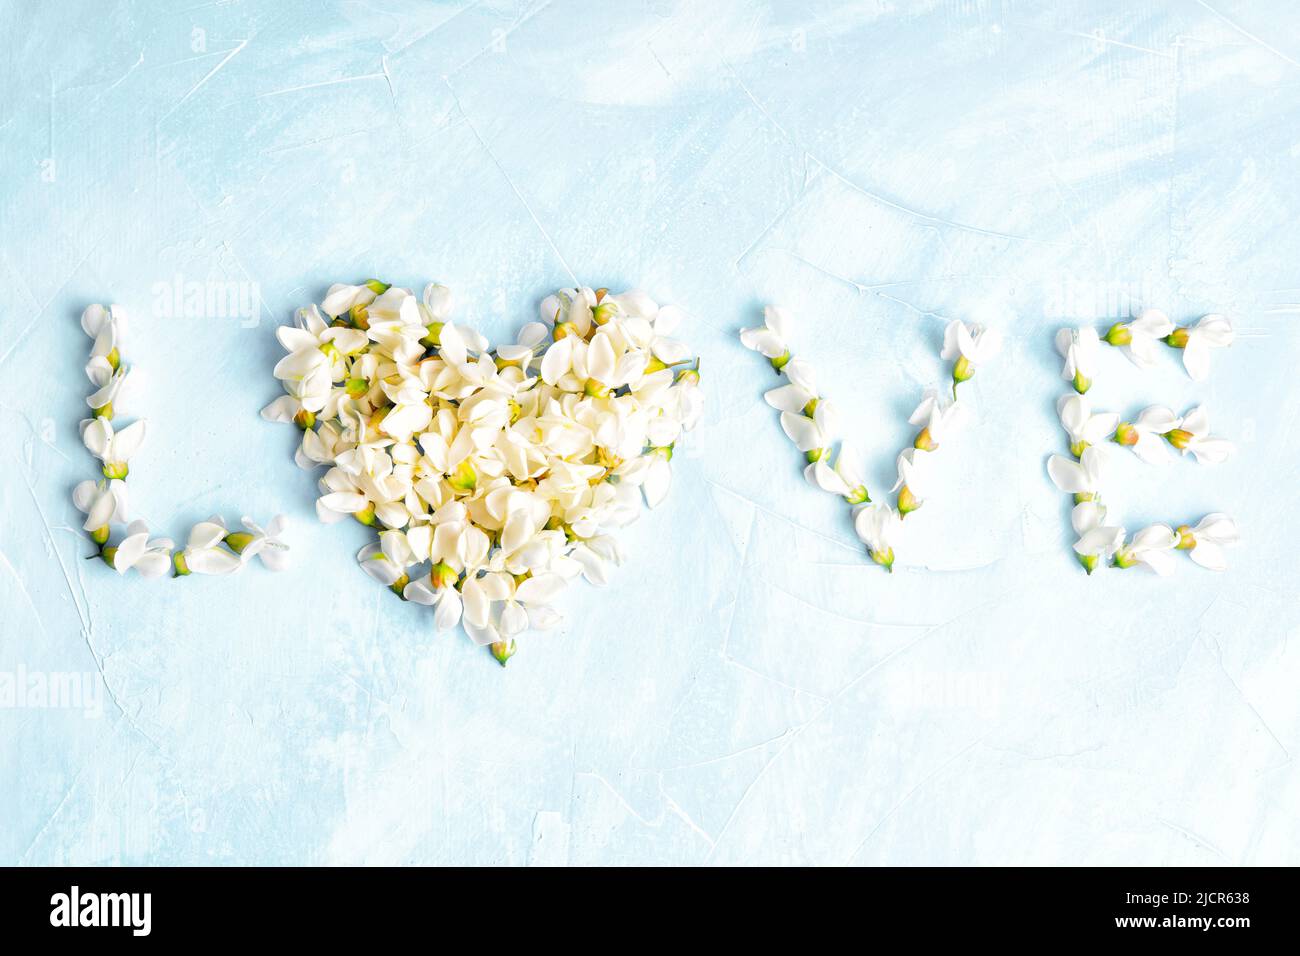 Word LOVE made from white acacia flowers on a pastel white-blue background. Romantic innocence and purity concept. Stock Photo